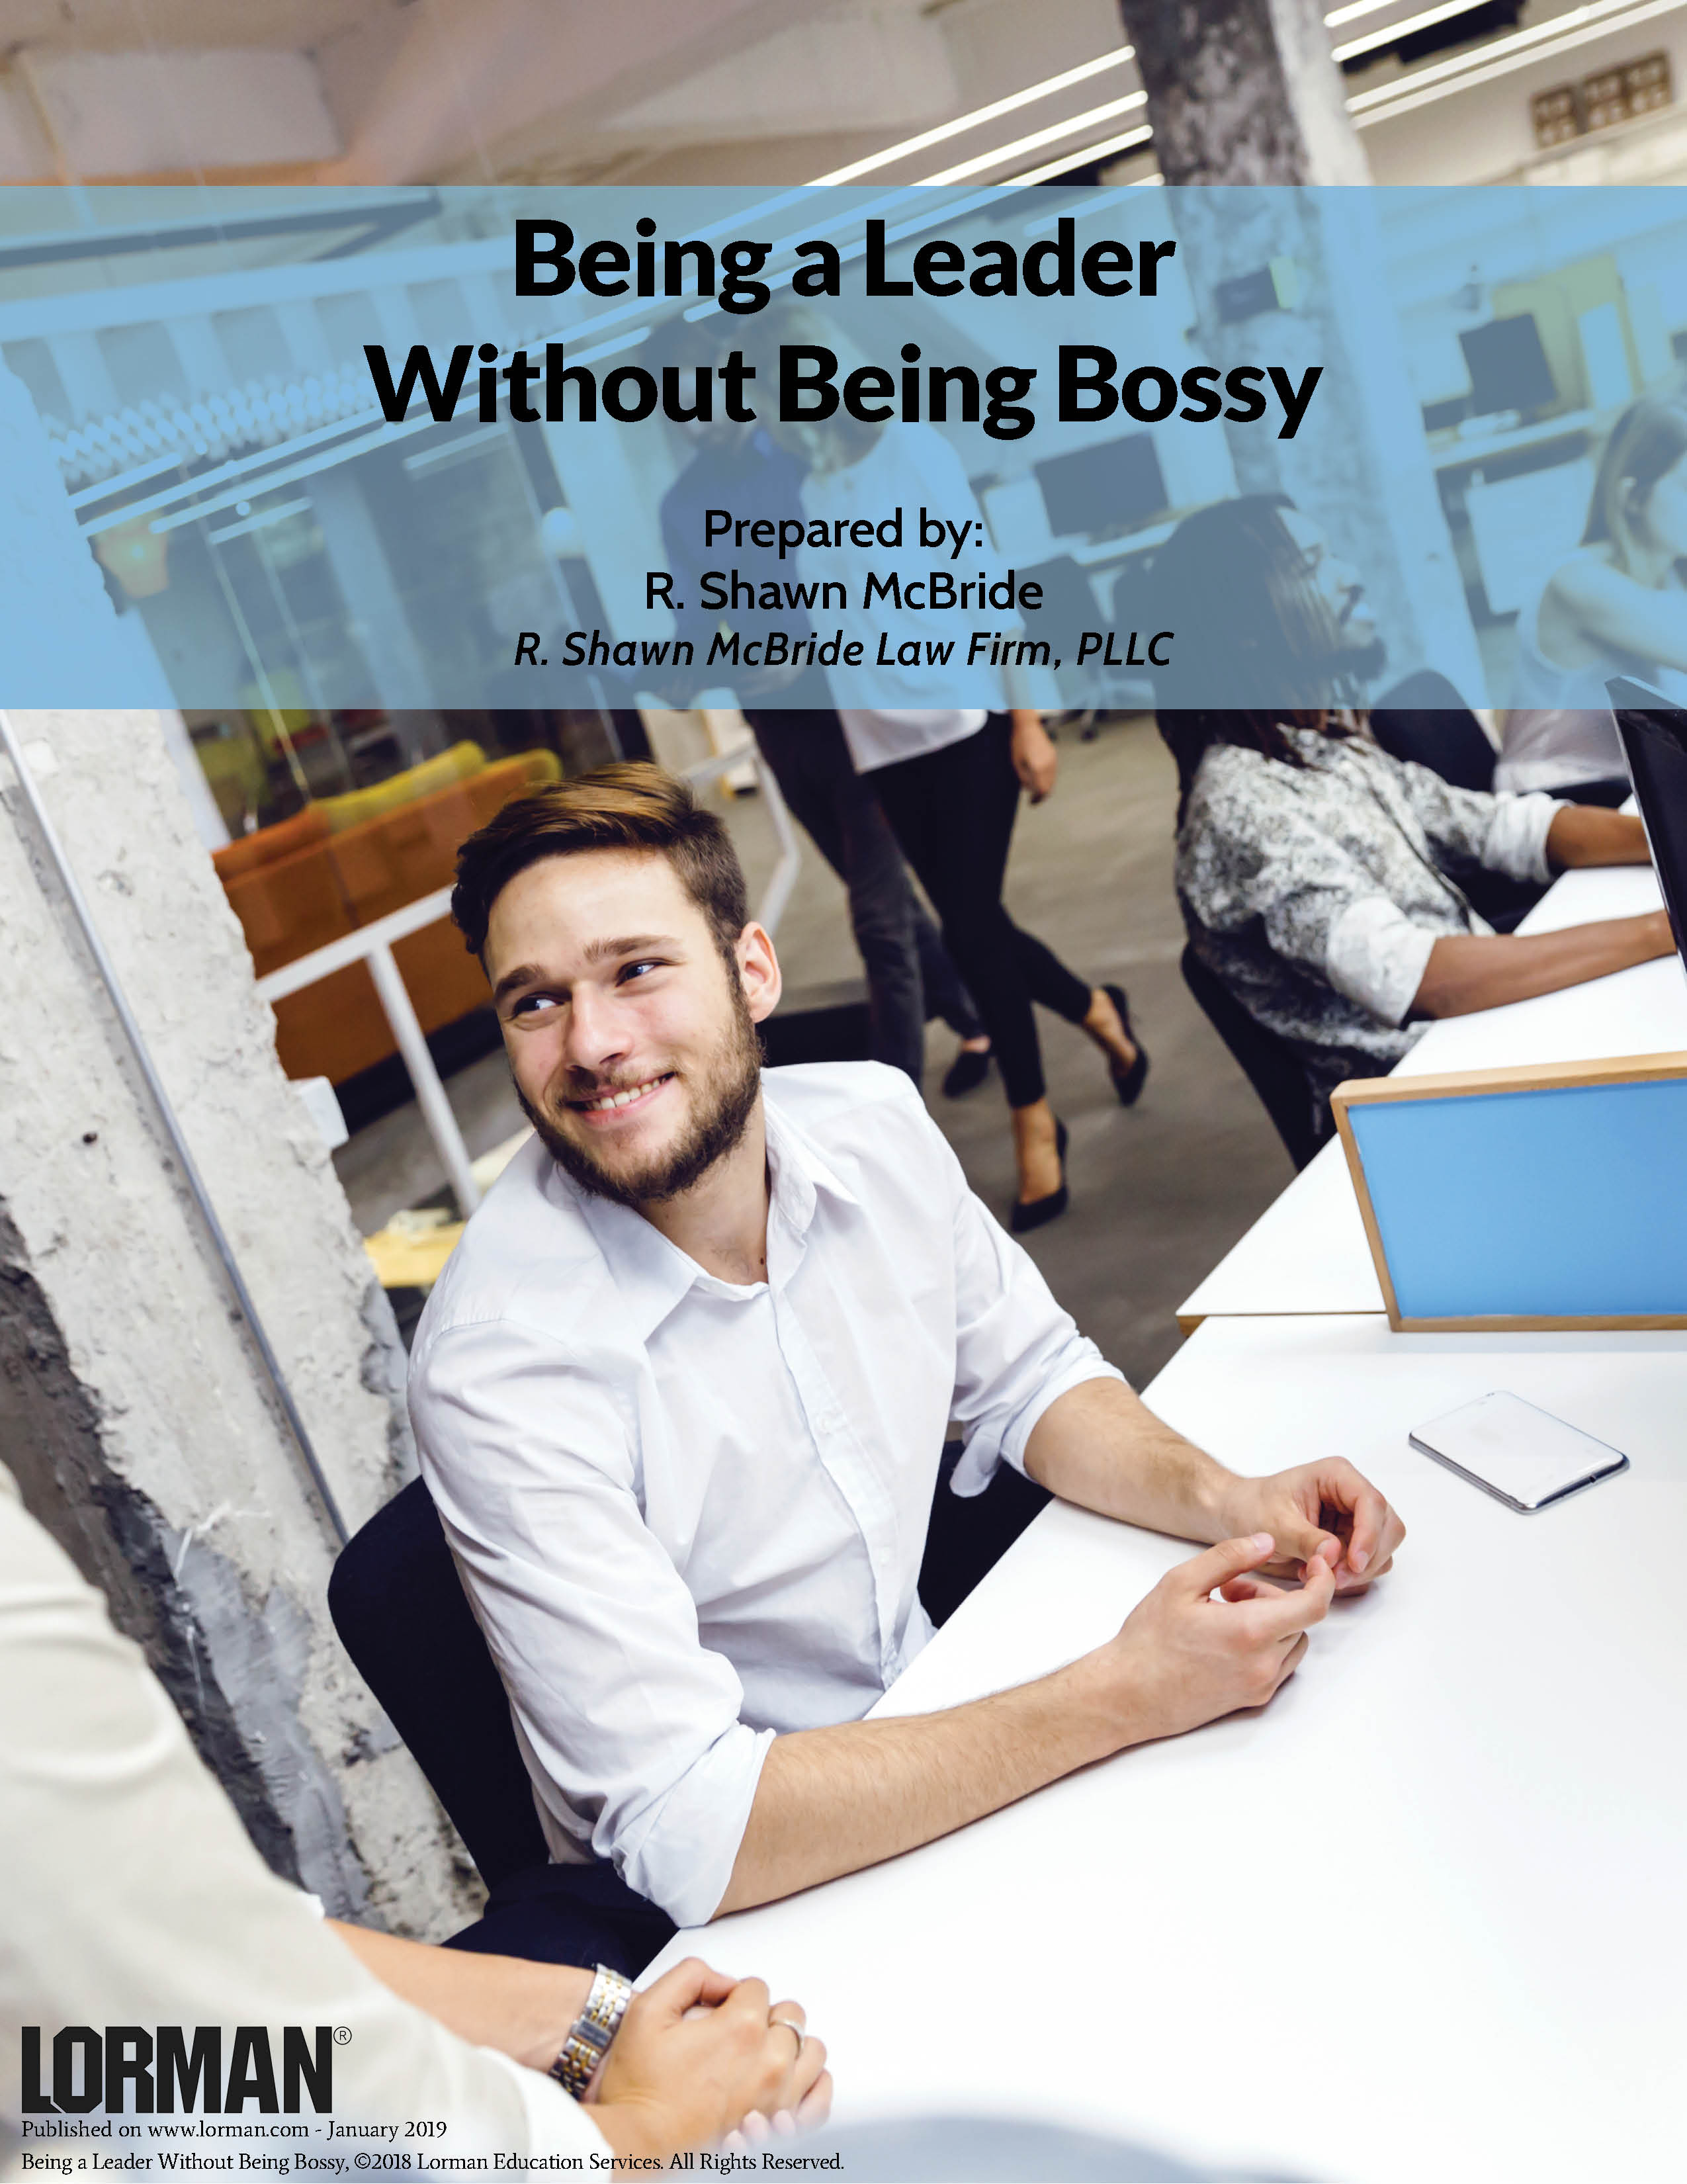 Being a Leader Without Being Bossy